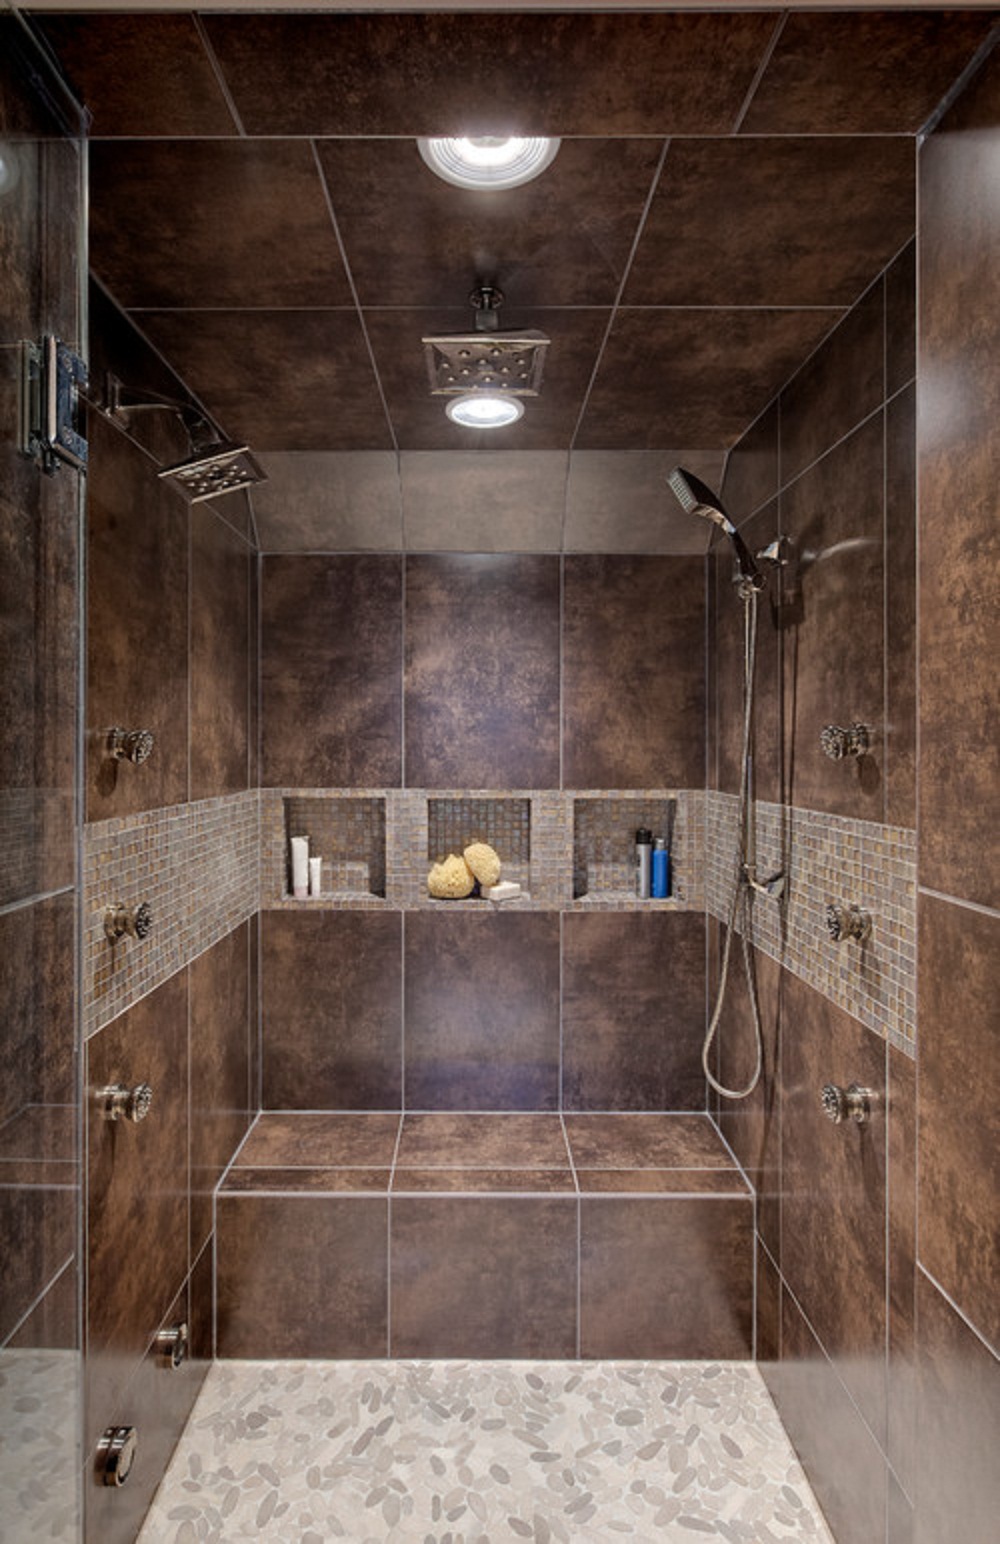 Rain Showerhead Cubical Modern Rain Showerhead In Bathroom Cubical Shower Equipped With Bench And Illuminated With Ceiling Light  Bathroom  Smart Ideas To Enhance Small Bathroom Shower 